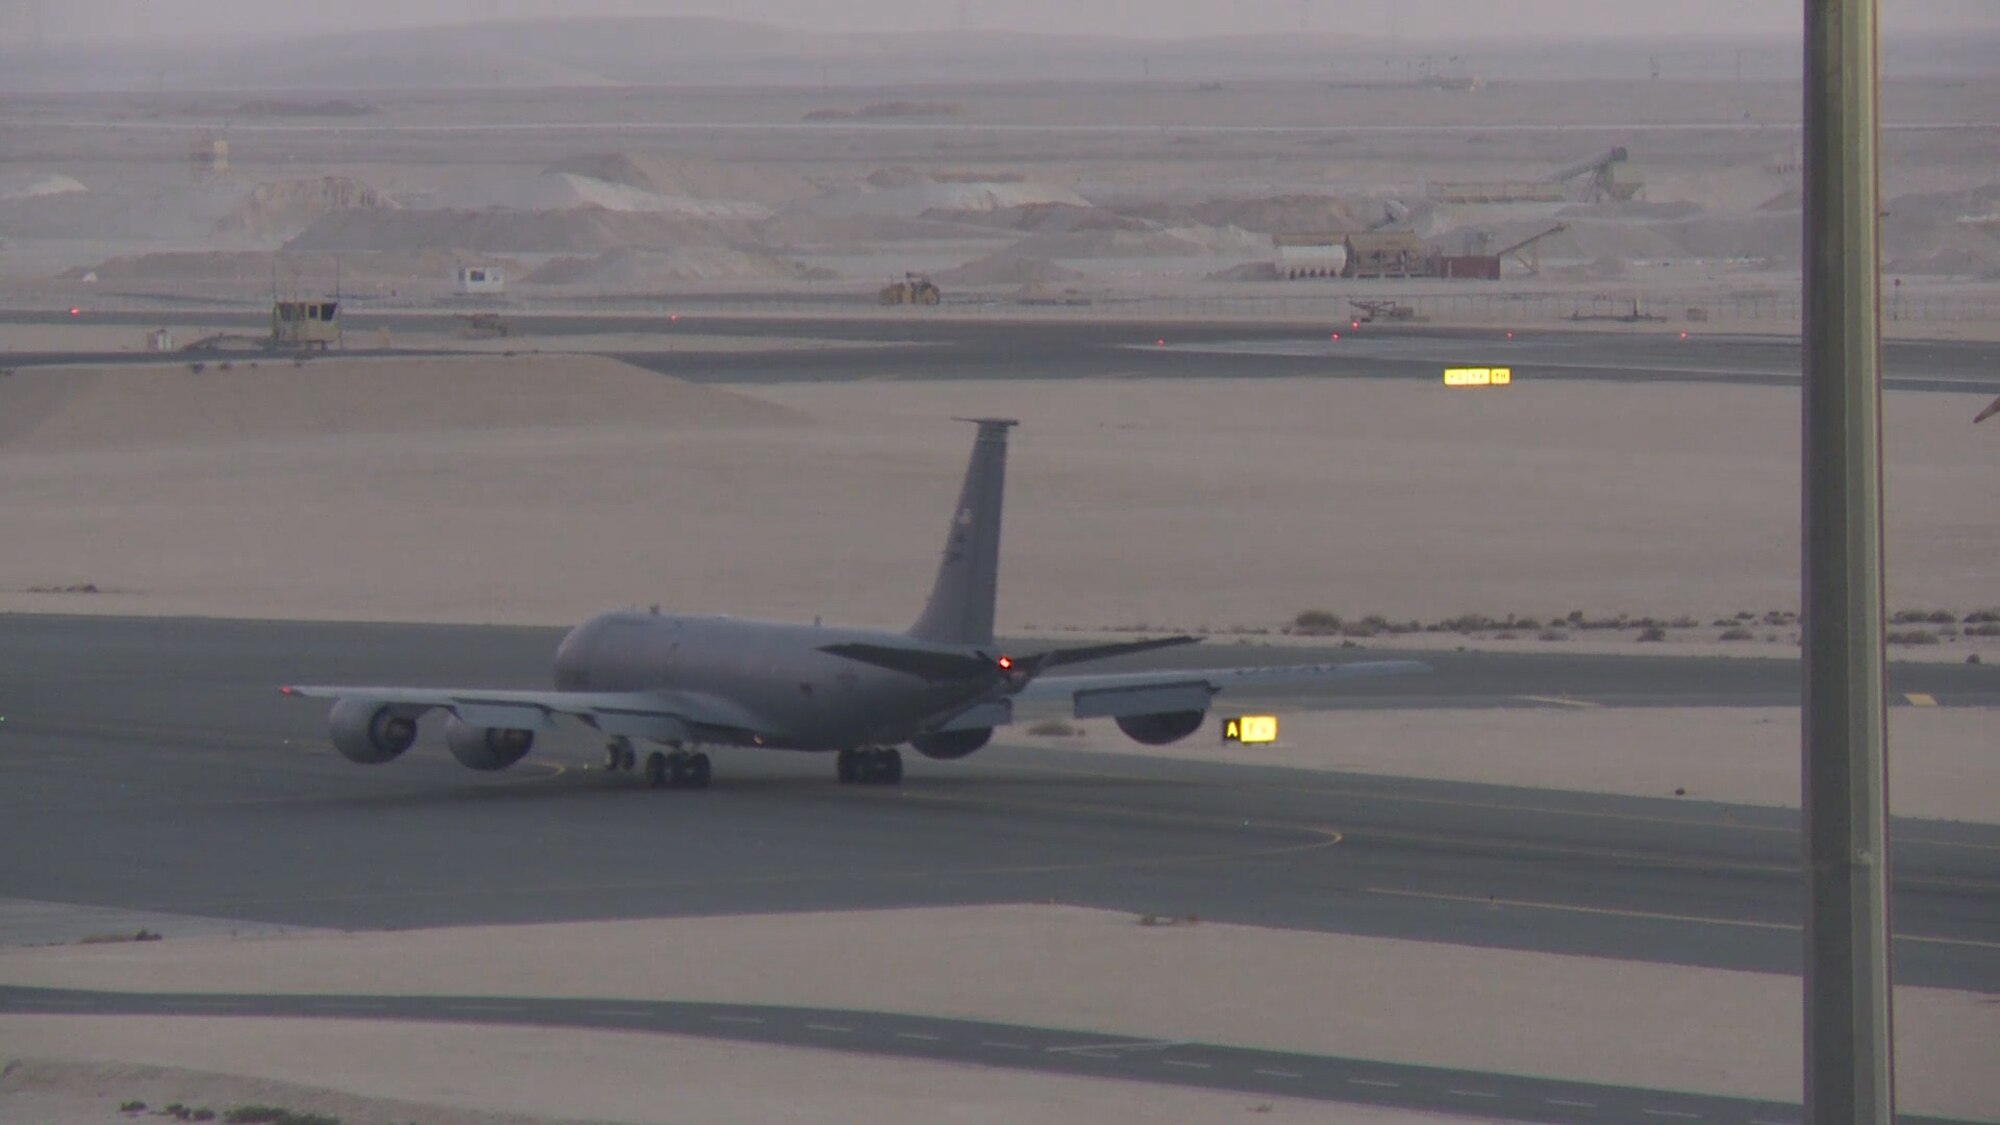 A KC-135 Stratotanker taxis in preparation for take-off, Dec. 31, 2014, at Al Udeid Air Base, Qatar. The 340th Expeditionary Air Refueling Squadron here surpassed a major milestone with their Roll-On Beyond Line of Sight Enhancement data link system when the unit completed 40,000 flight hours while supporting combat missions in the U.S. Central Command area of operations. (U.S. Air Force photo by Staff Sgt. Mariko Frazee)